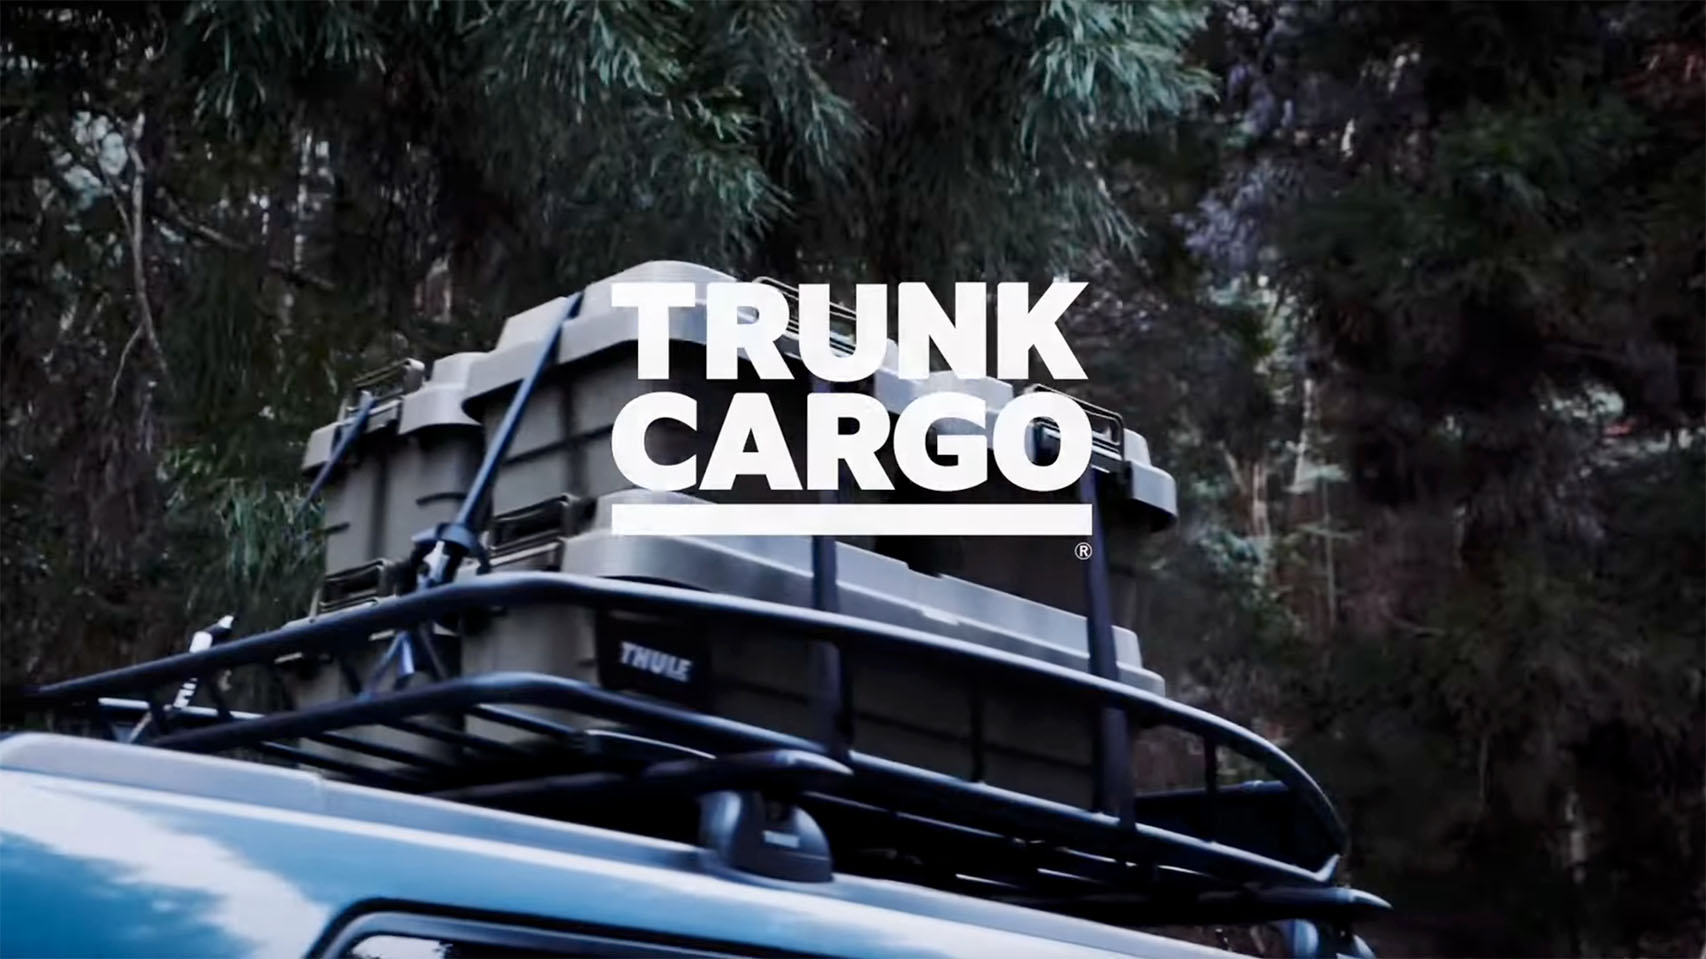 Load video: Trunk Cargo Official Video for Low type storage box